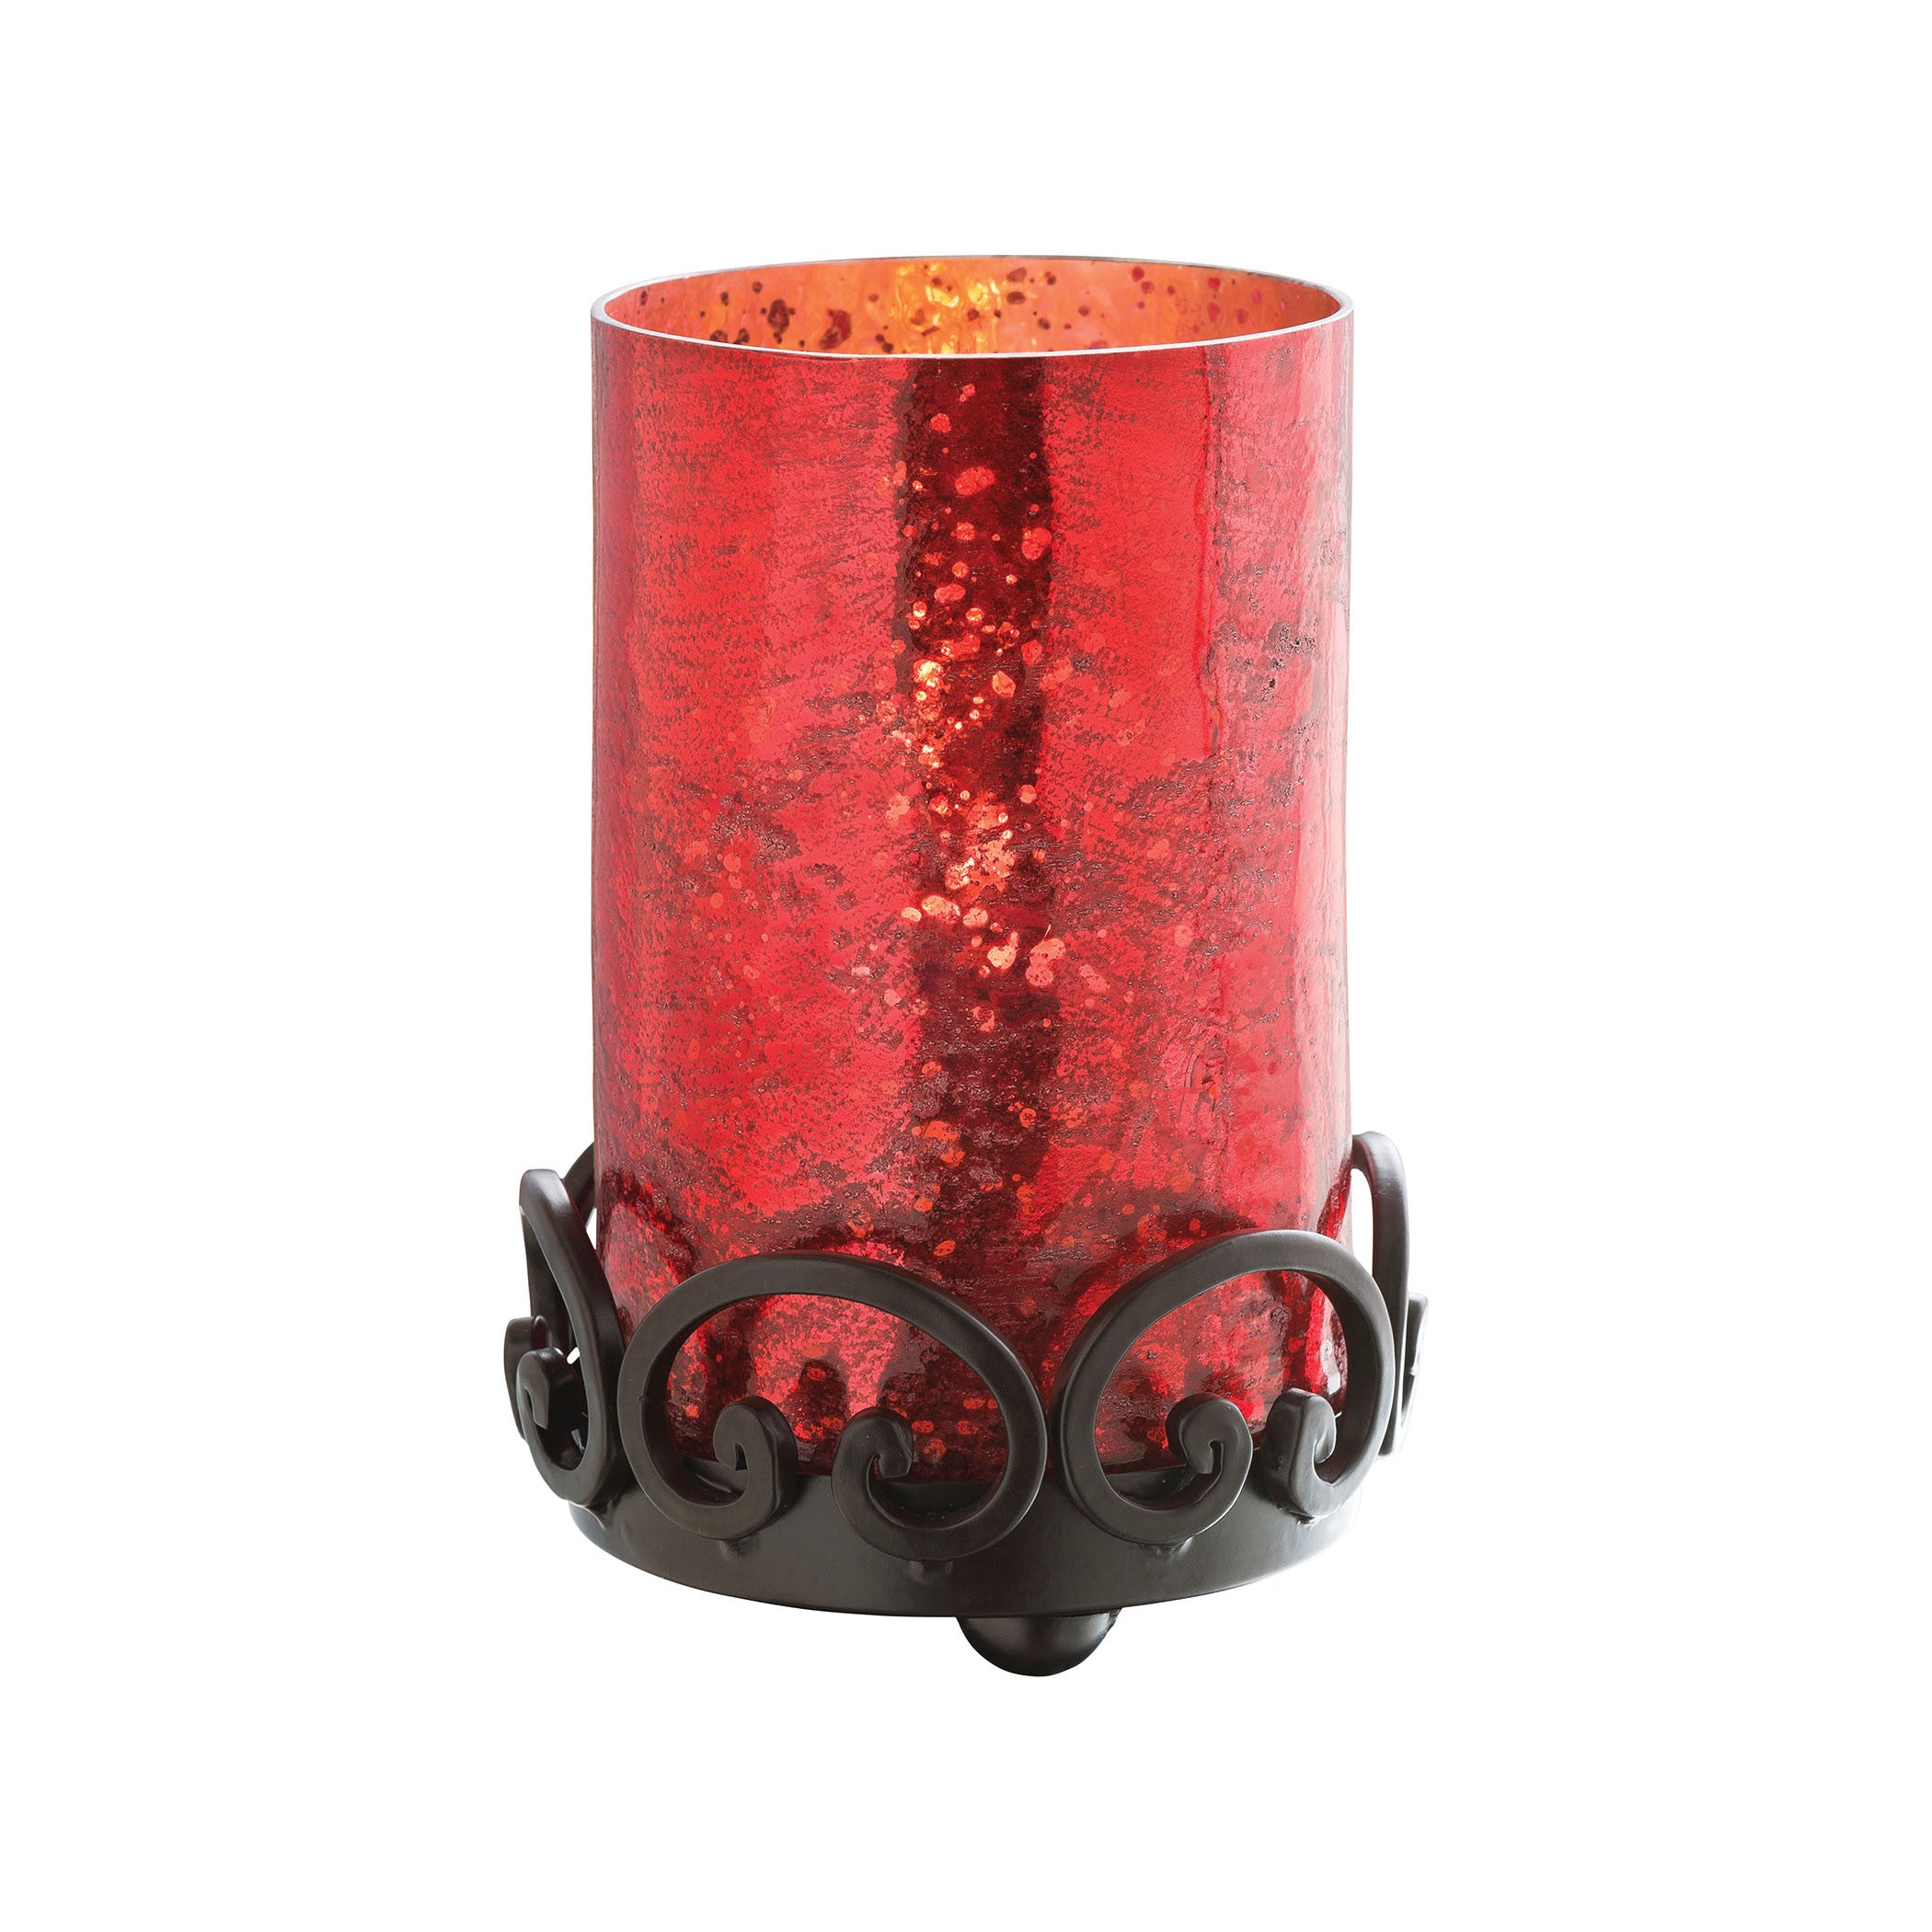 Pomeroy Pom-503610 Corona Collection Rustic,antique Red Artifact Finish Candle/candle Holder